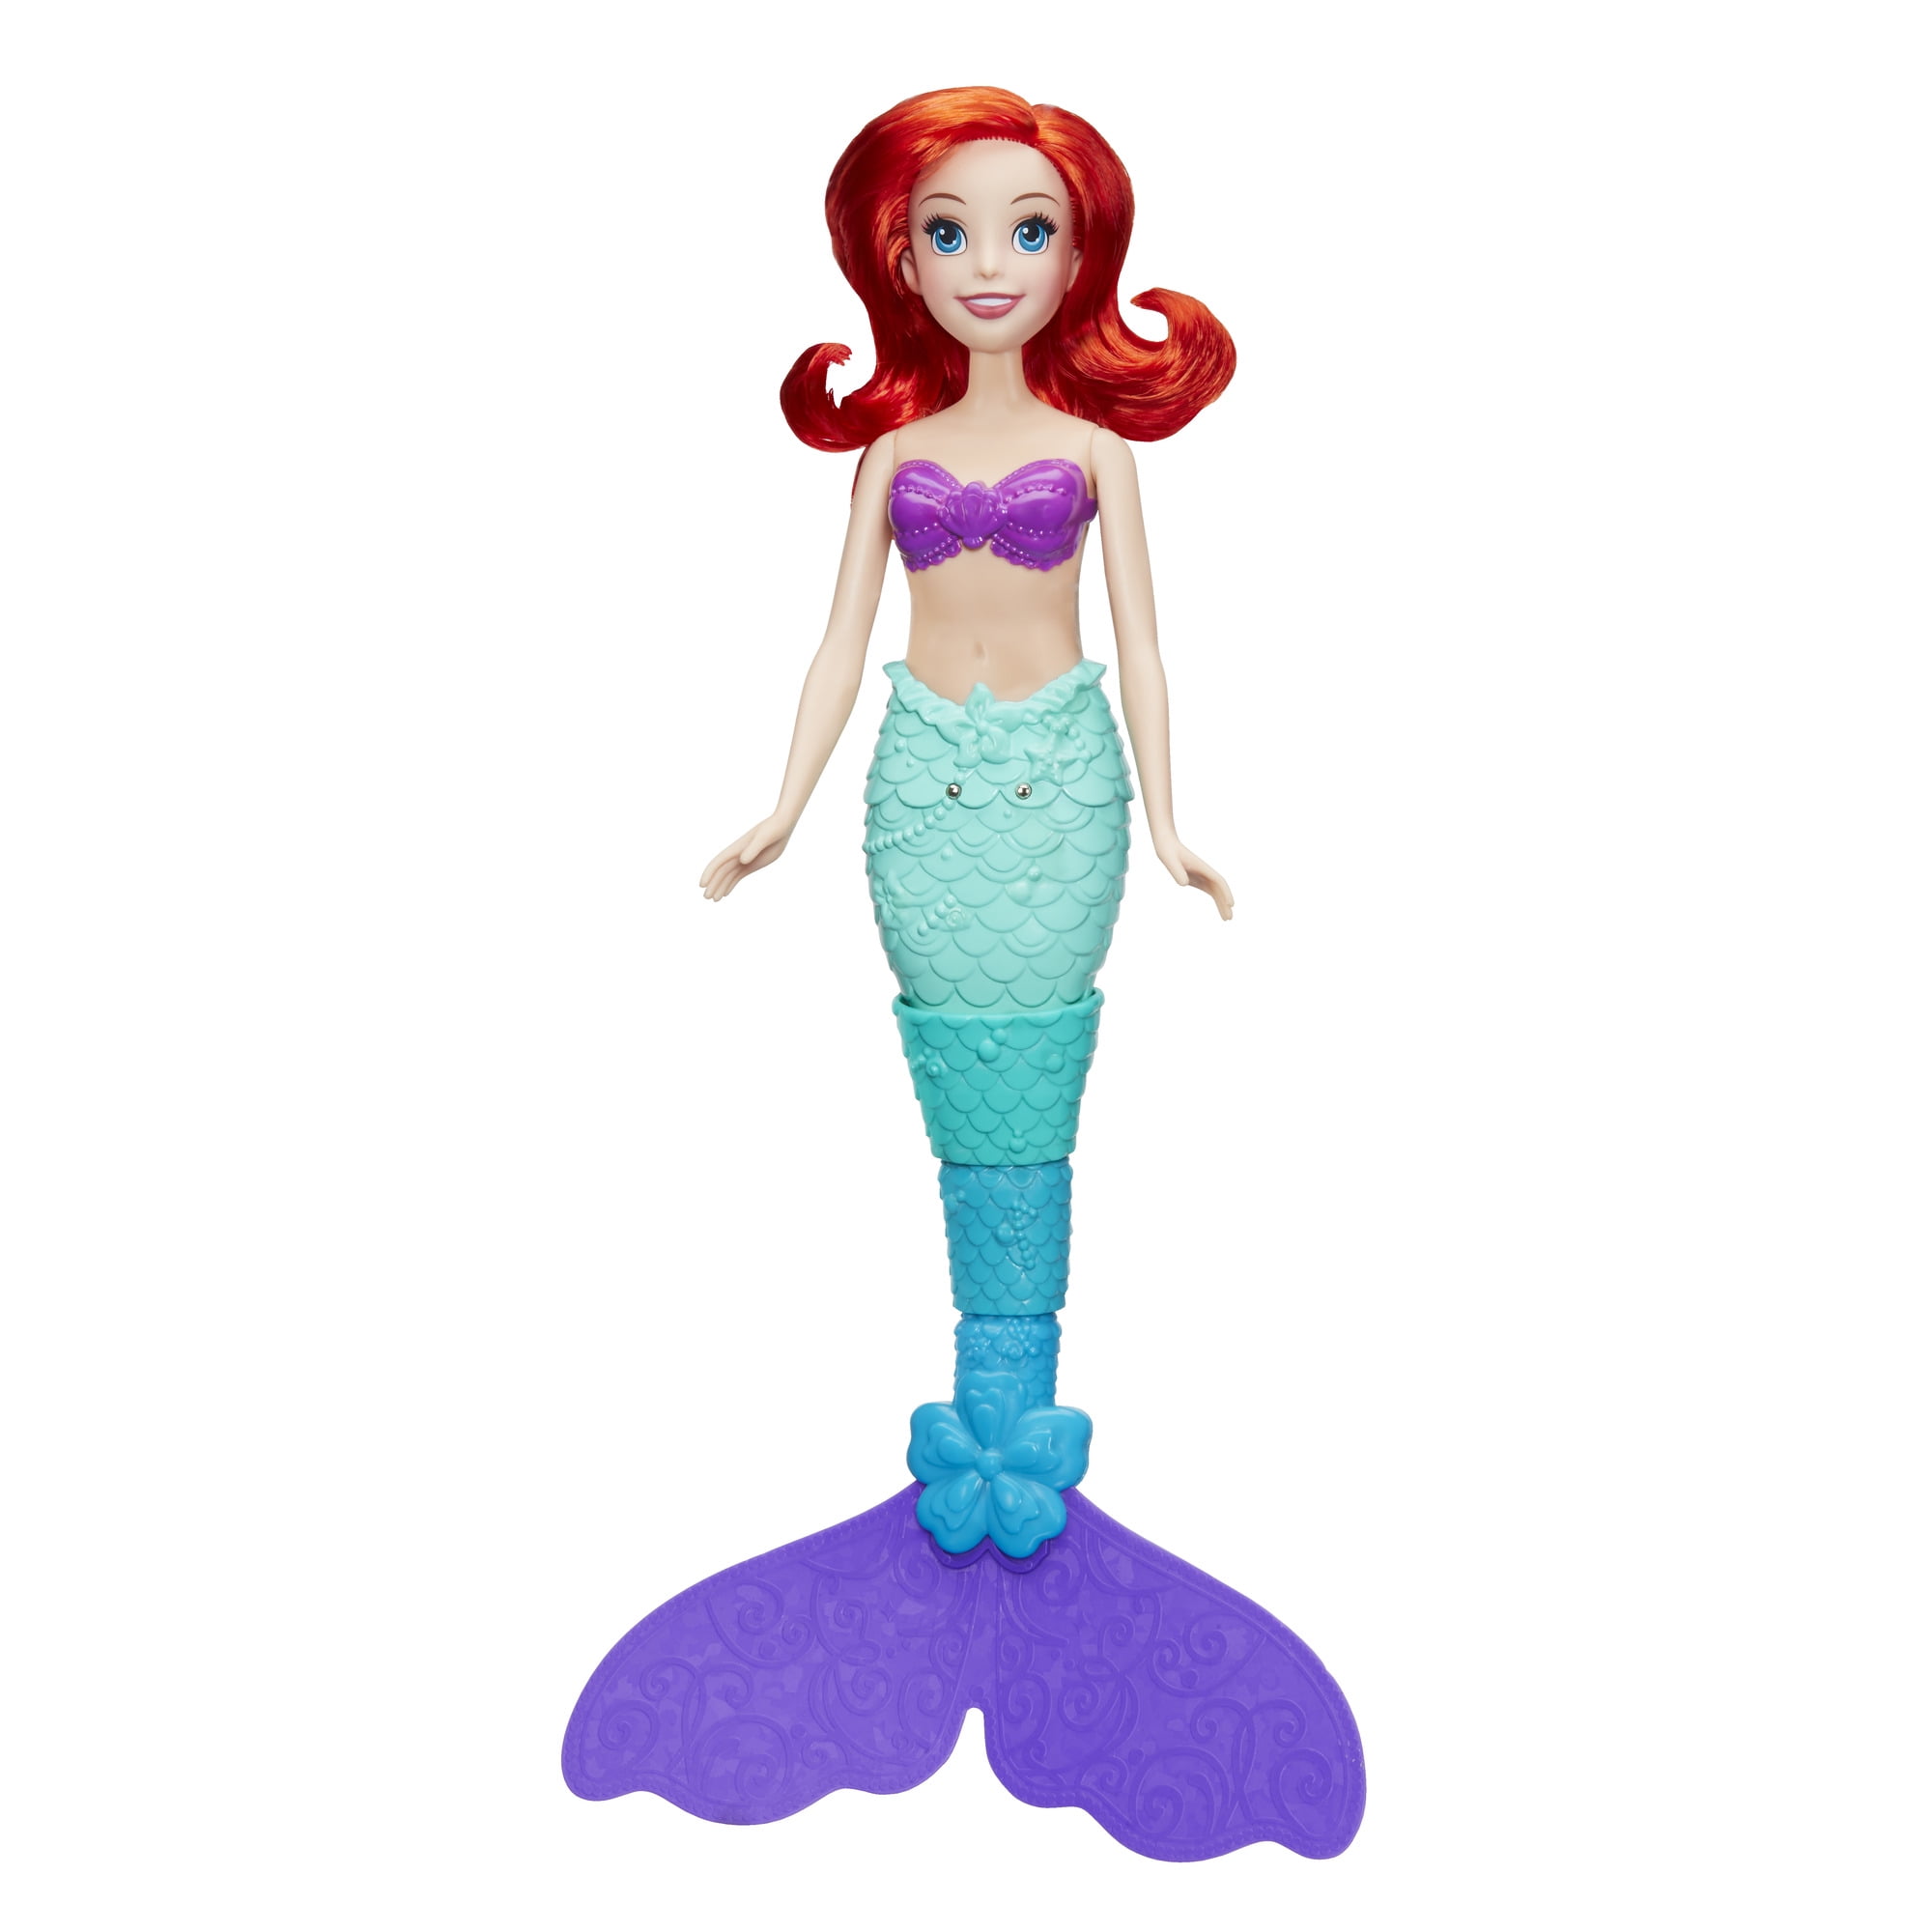 Disney Princess Swimming Adventures Ariel Doll For Ages 3 And Up